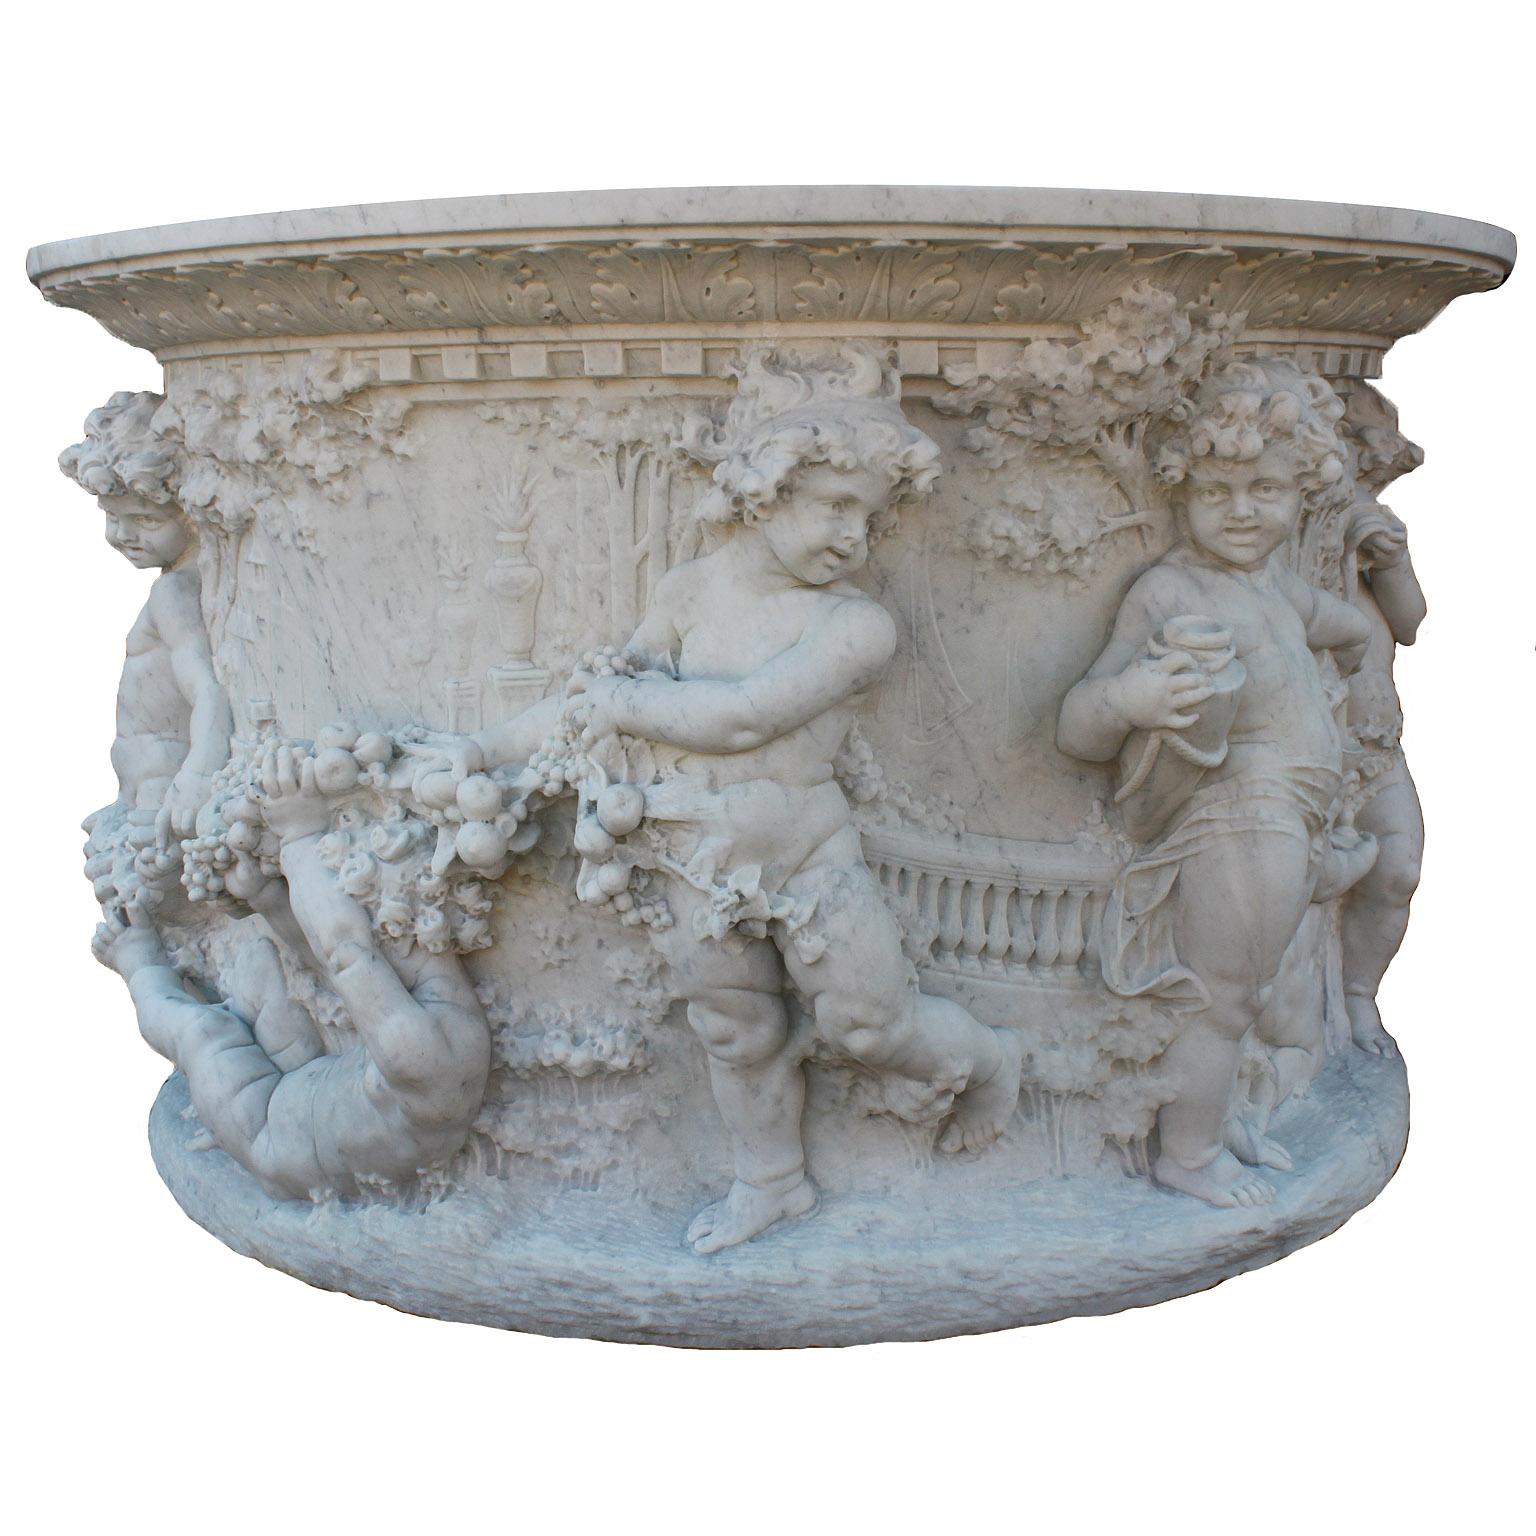 Italian 19th-20th Century Whimsical White Marble Wishing Wellhead with Children In Fair Condition For Sale In Los Angeles, CA